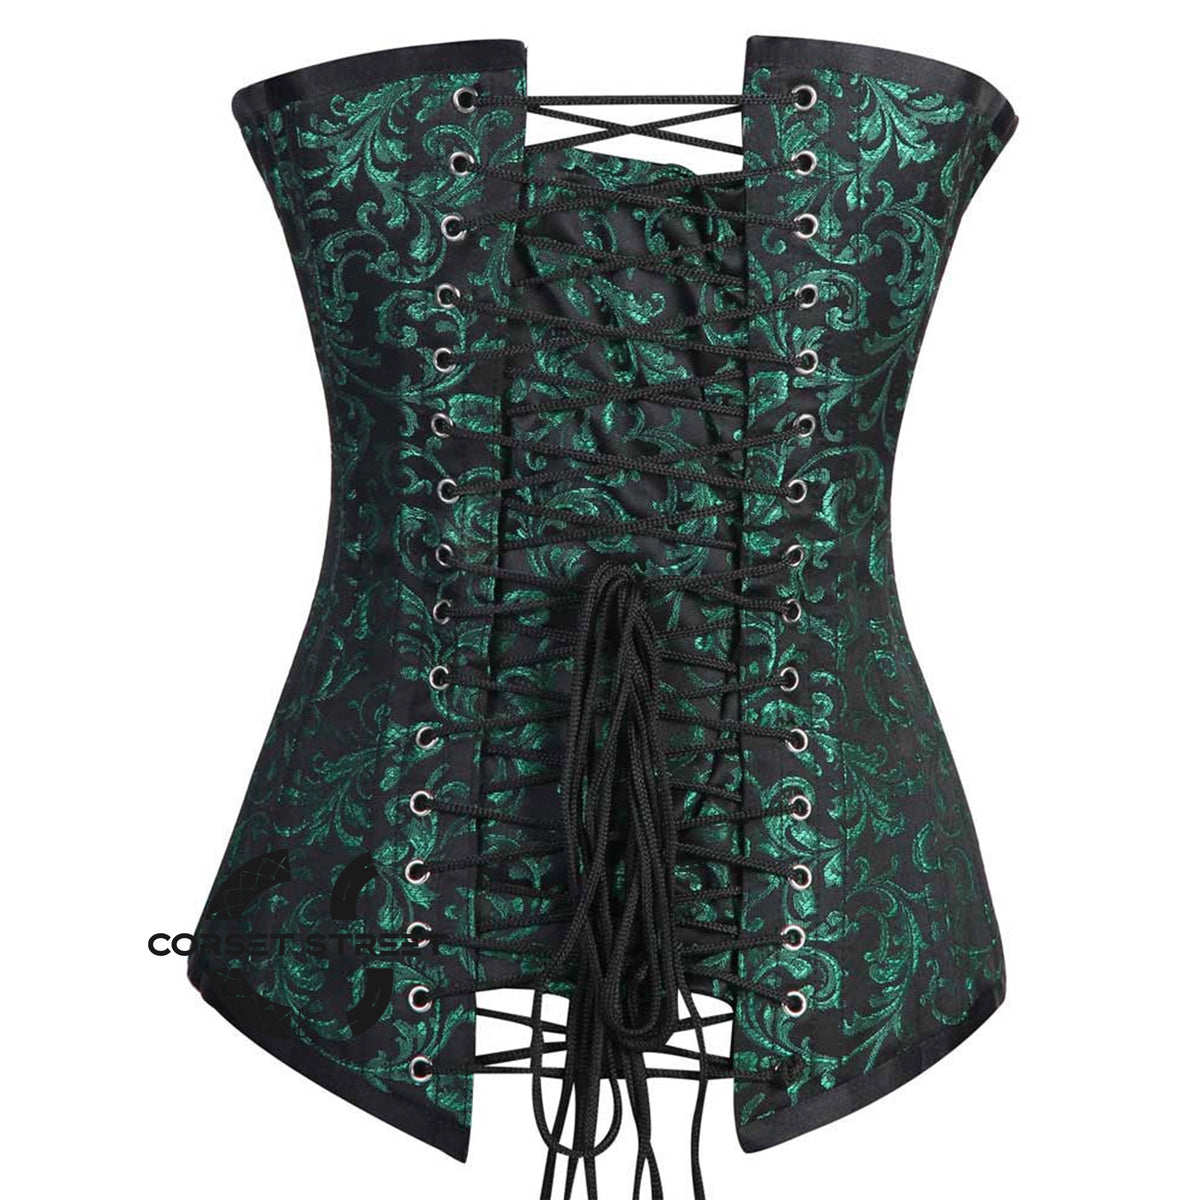 Green And Black Brocade Longline Gothic Corset Burlesque Overbust Costume Plus Size Bustier Top